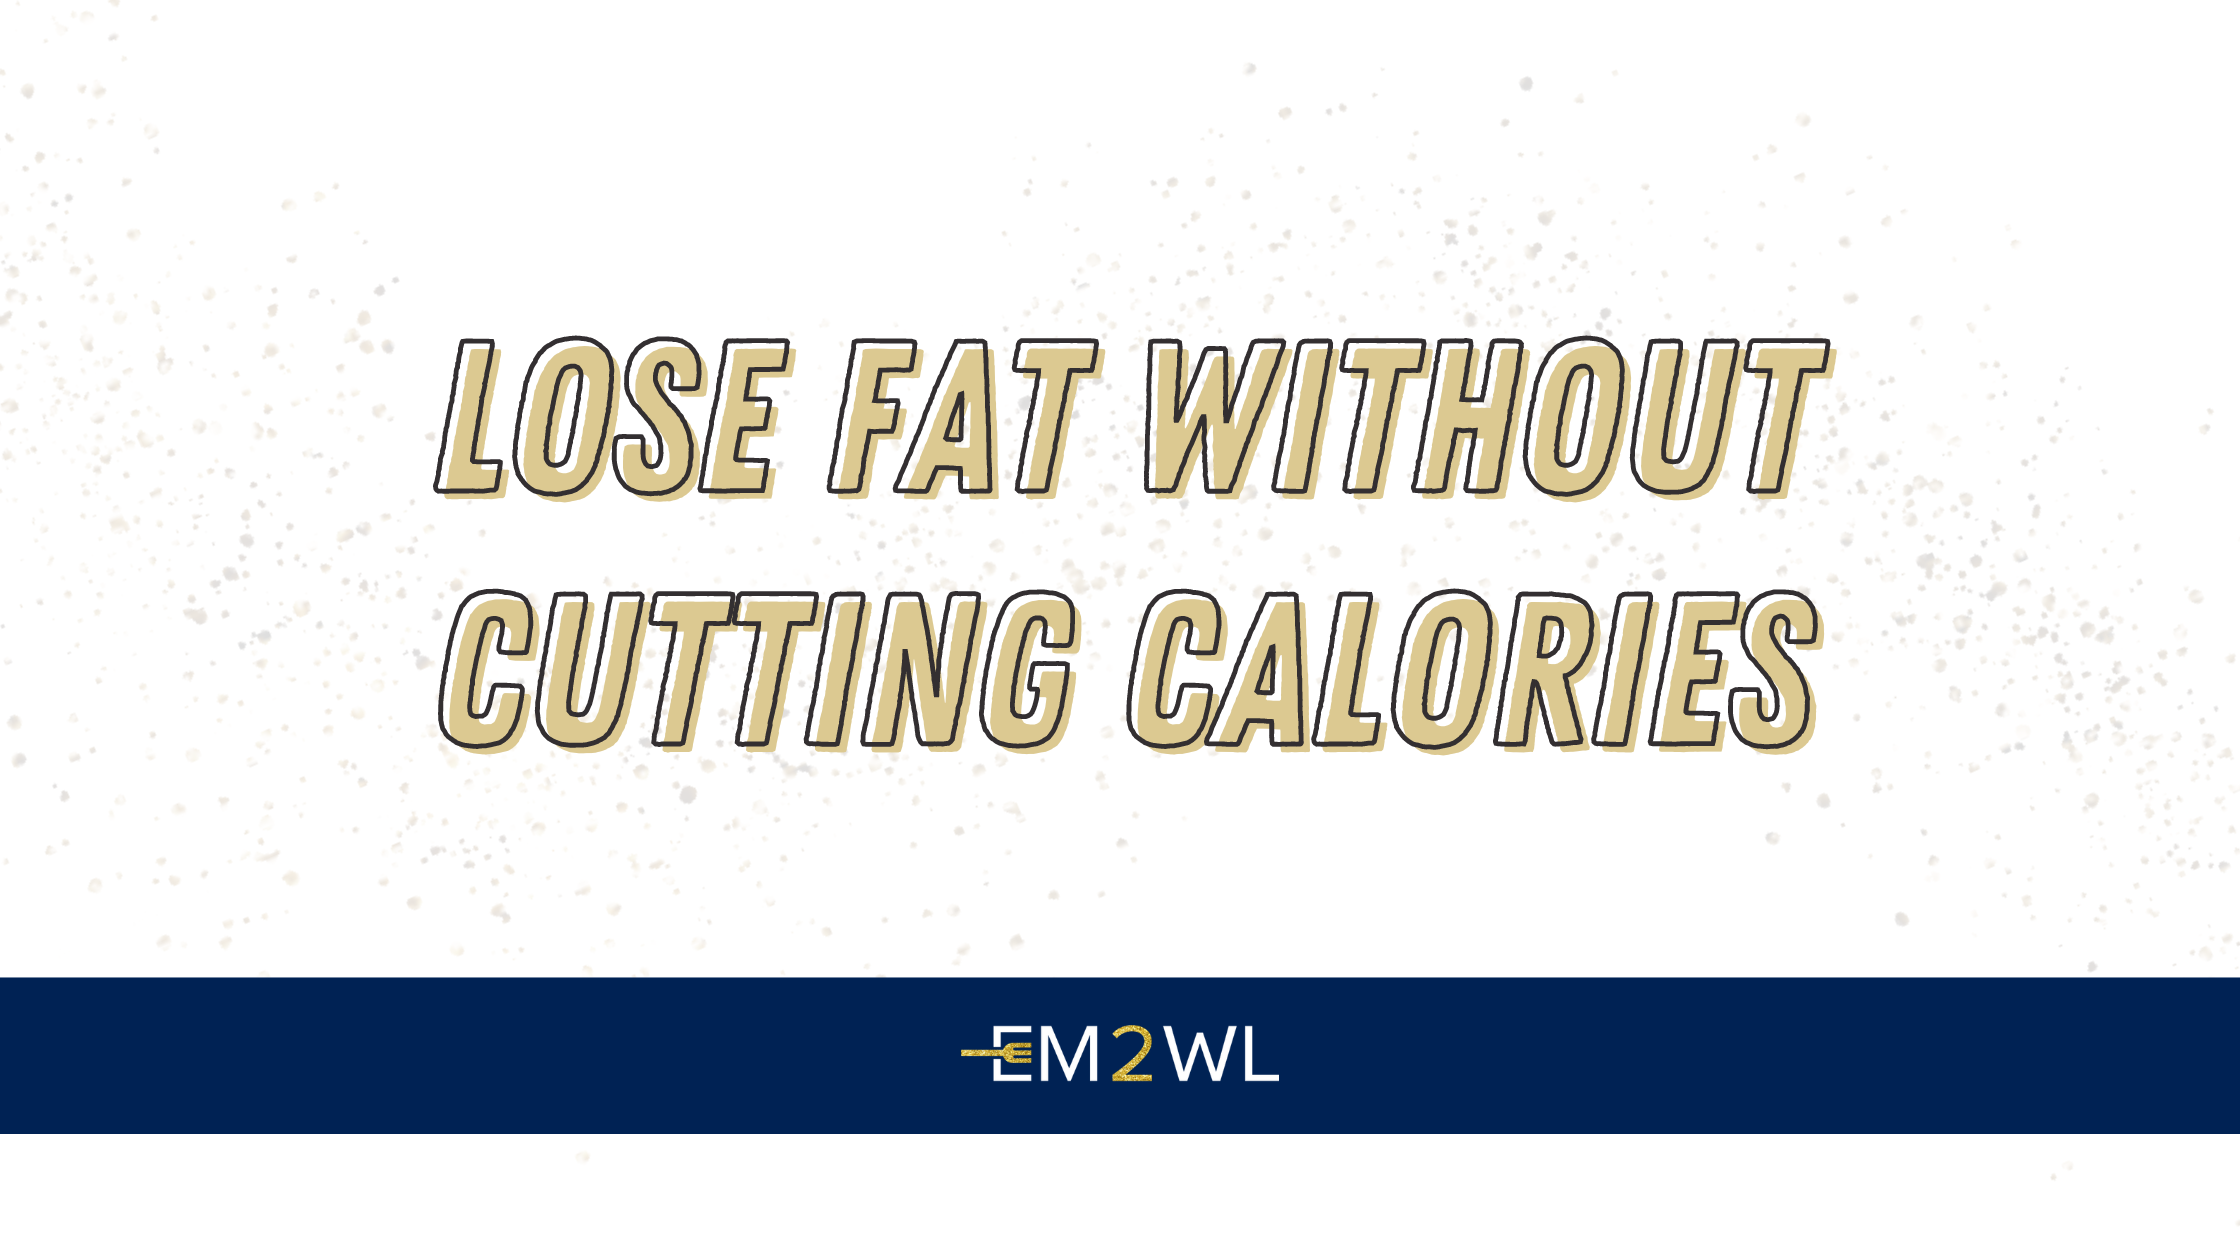 How To Lose Fat WITHOUT Cutting Calories